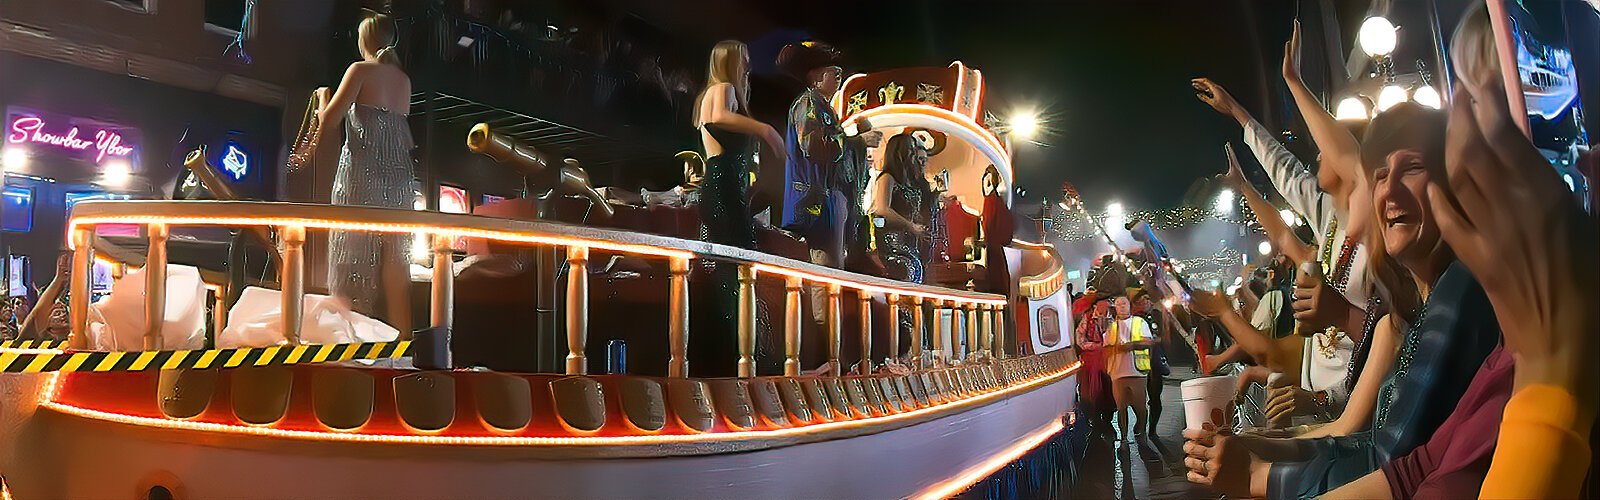 The family-friendly Knight Parade features a fleet of 85 illuminated floats from 65 krewes and organizations that roll down Ybor City’s Seventh Avenue.